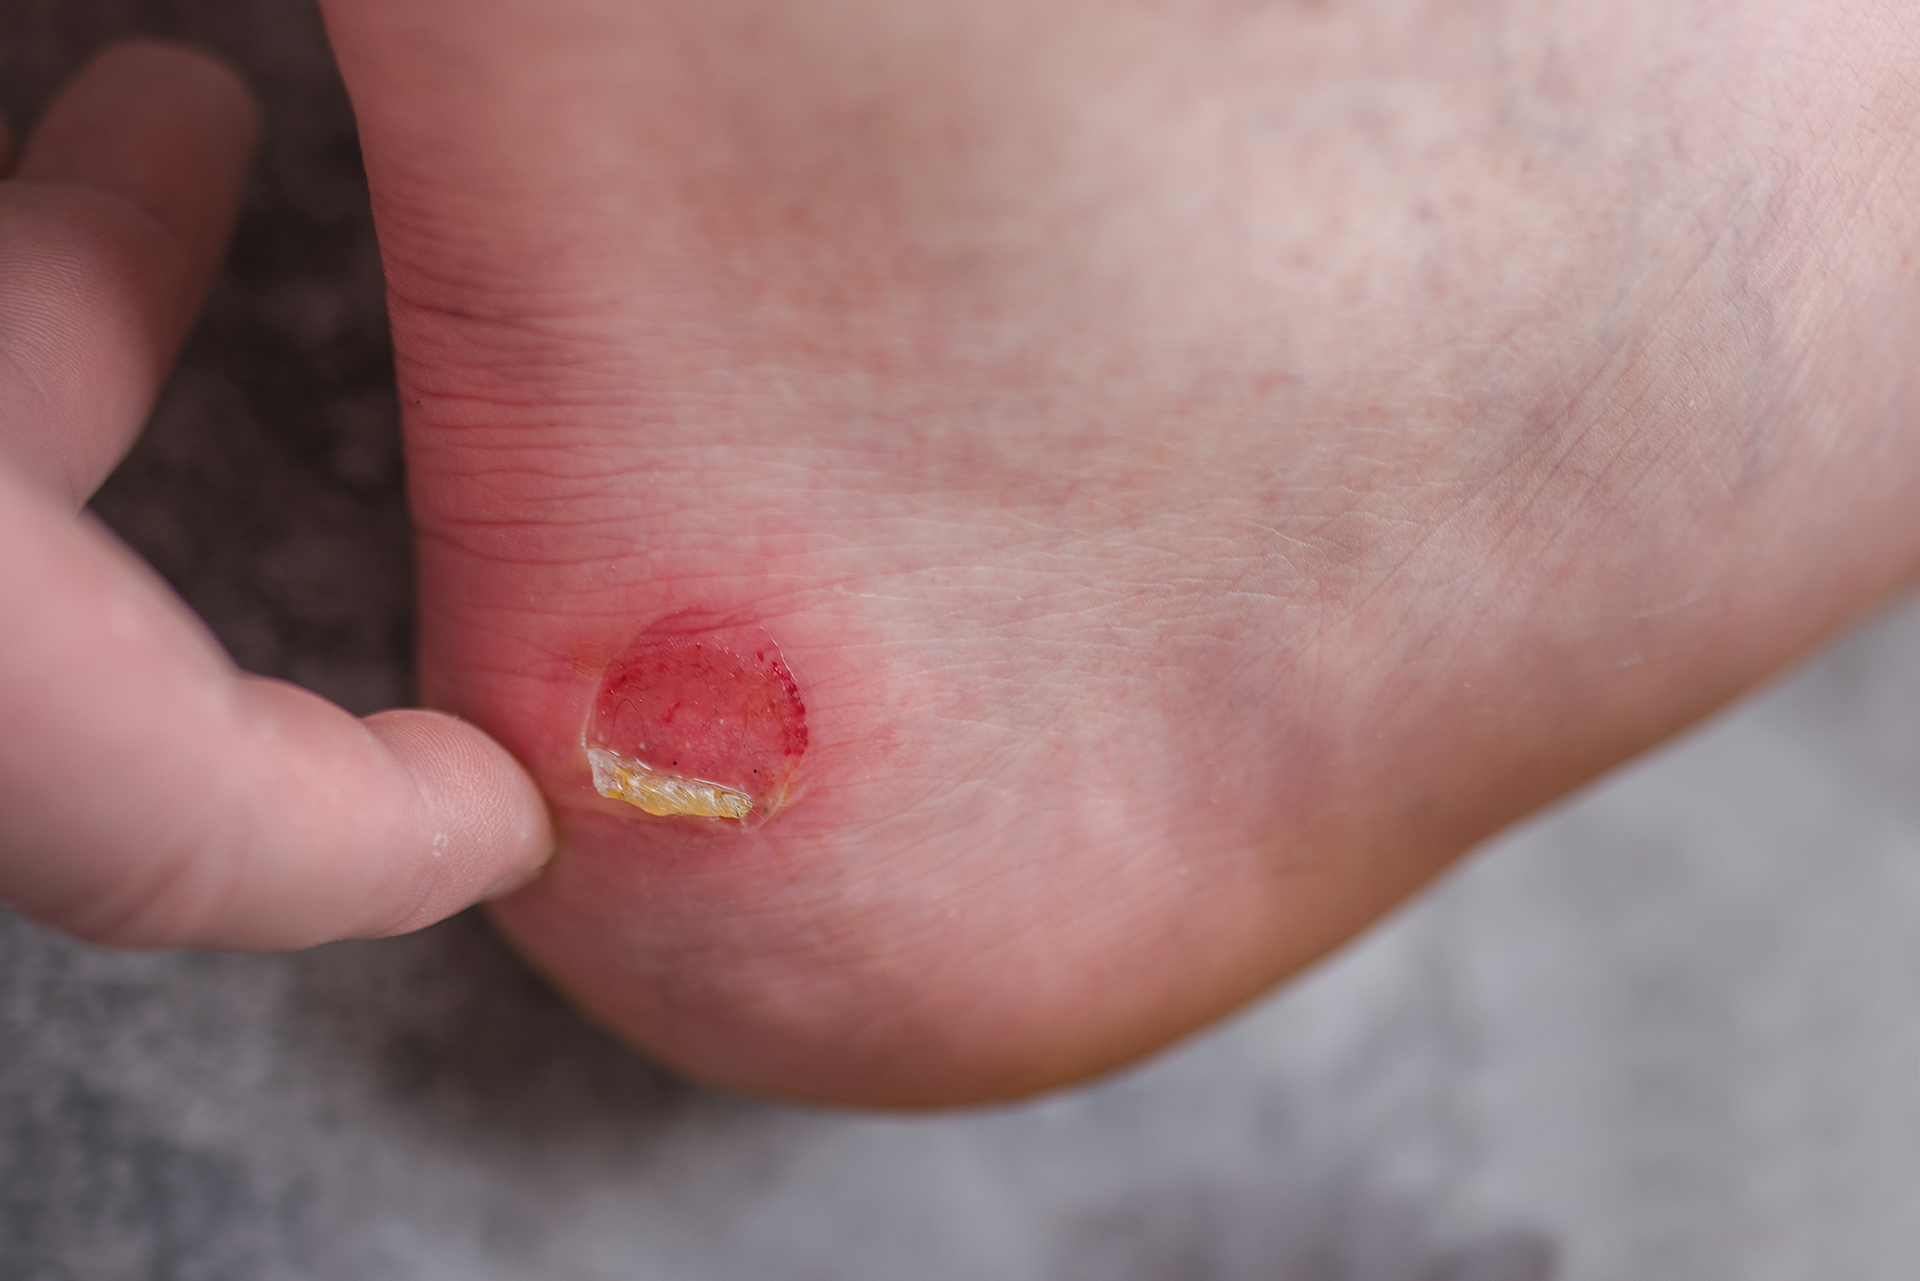 how to treat blisters on feet from running